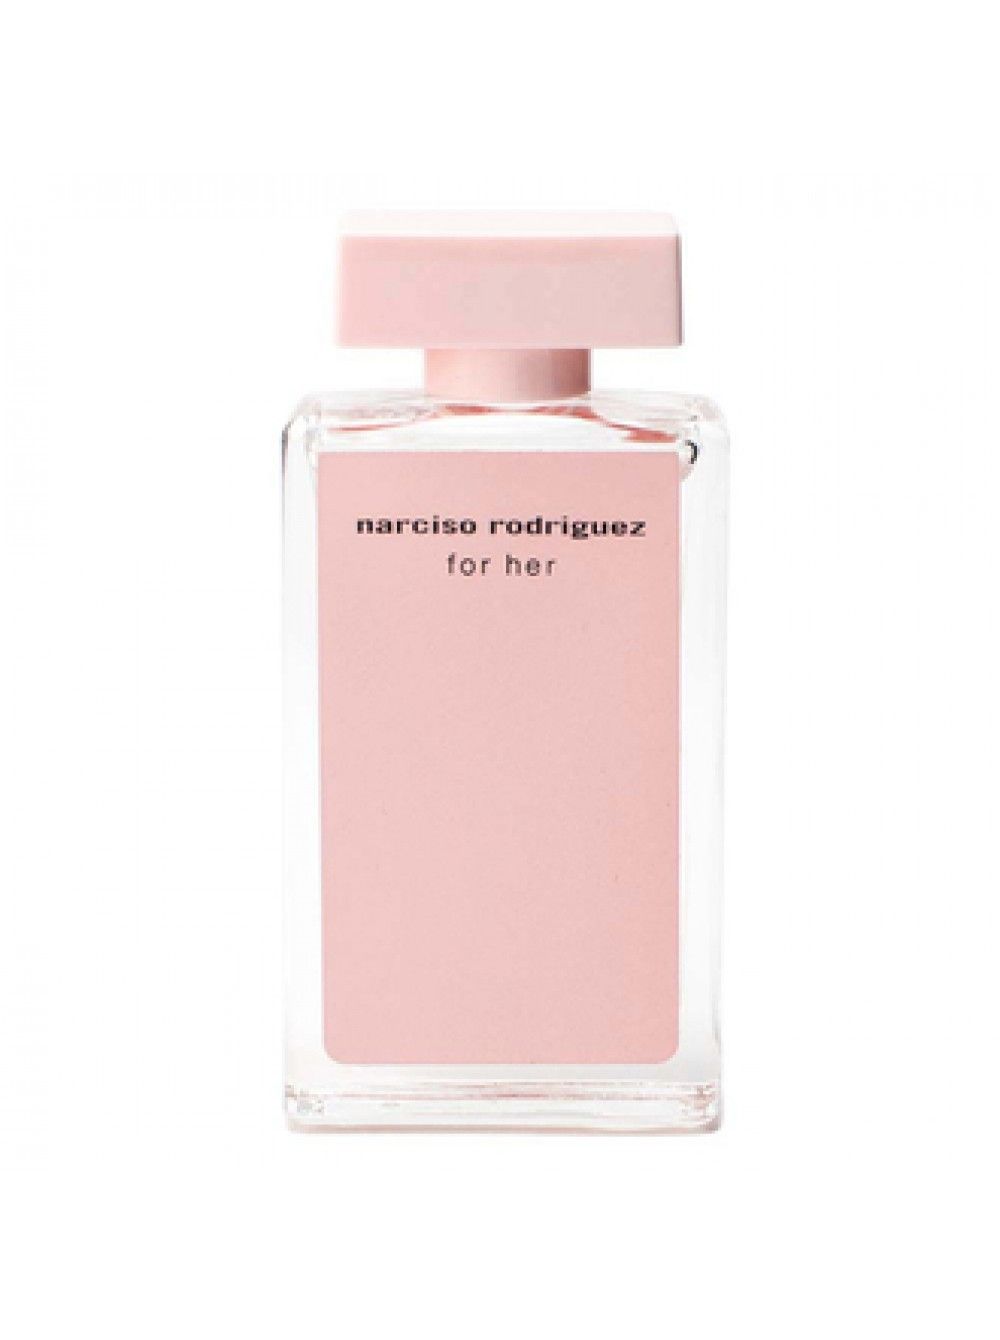 Narciso Rodriguez for her 100ml. Narciso Rodriguez for her EDP 7.5ml. Narciso Rodriguez for her Eau de Parfum. Narciso Rodriguez for her Eau de Parfum Narciso Rodriguez. Шлейф туалетной воды